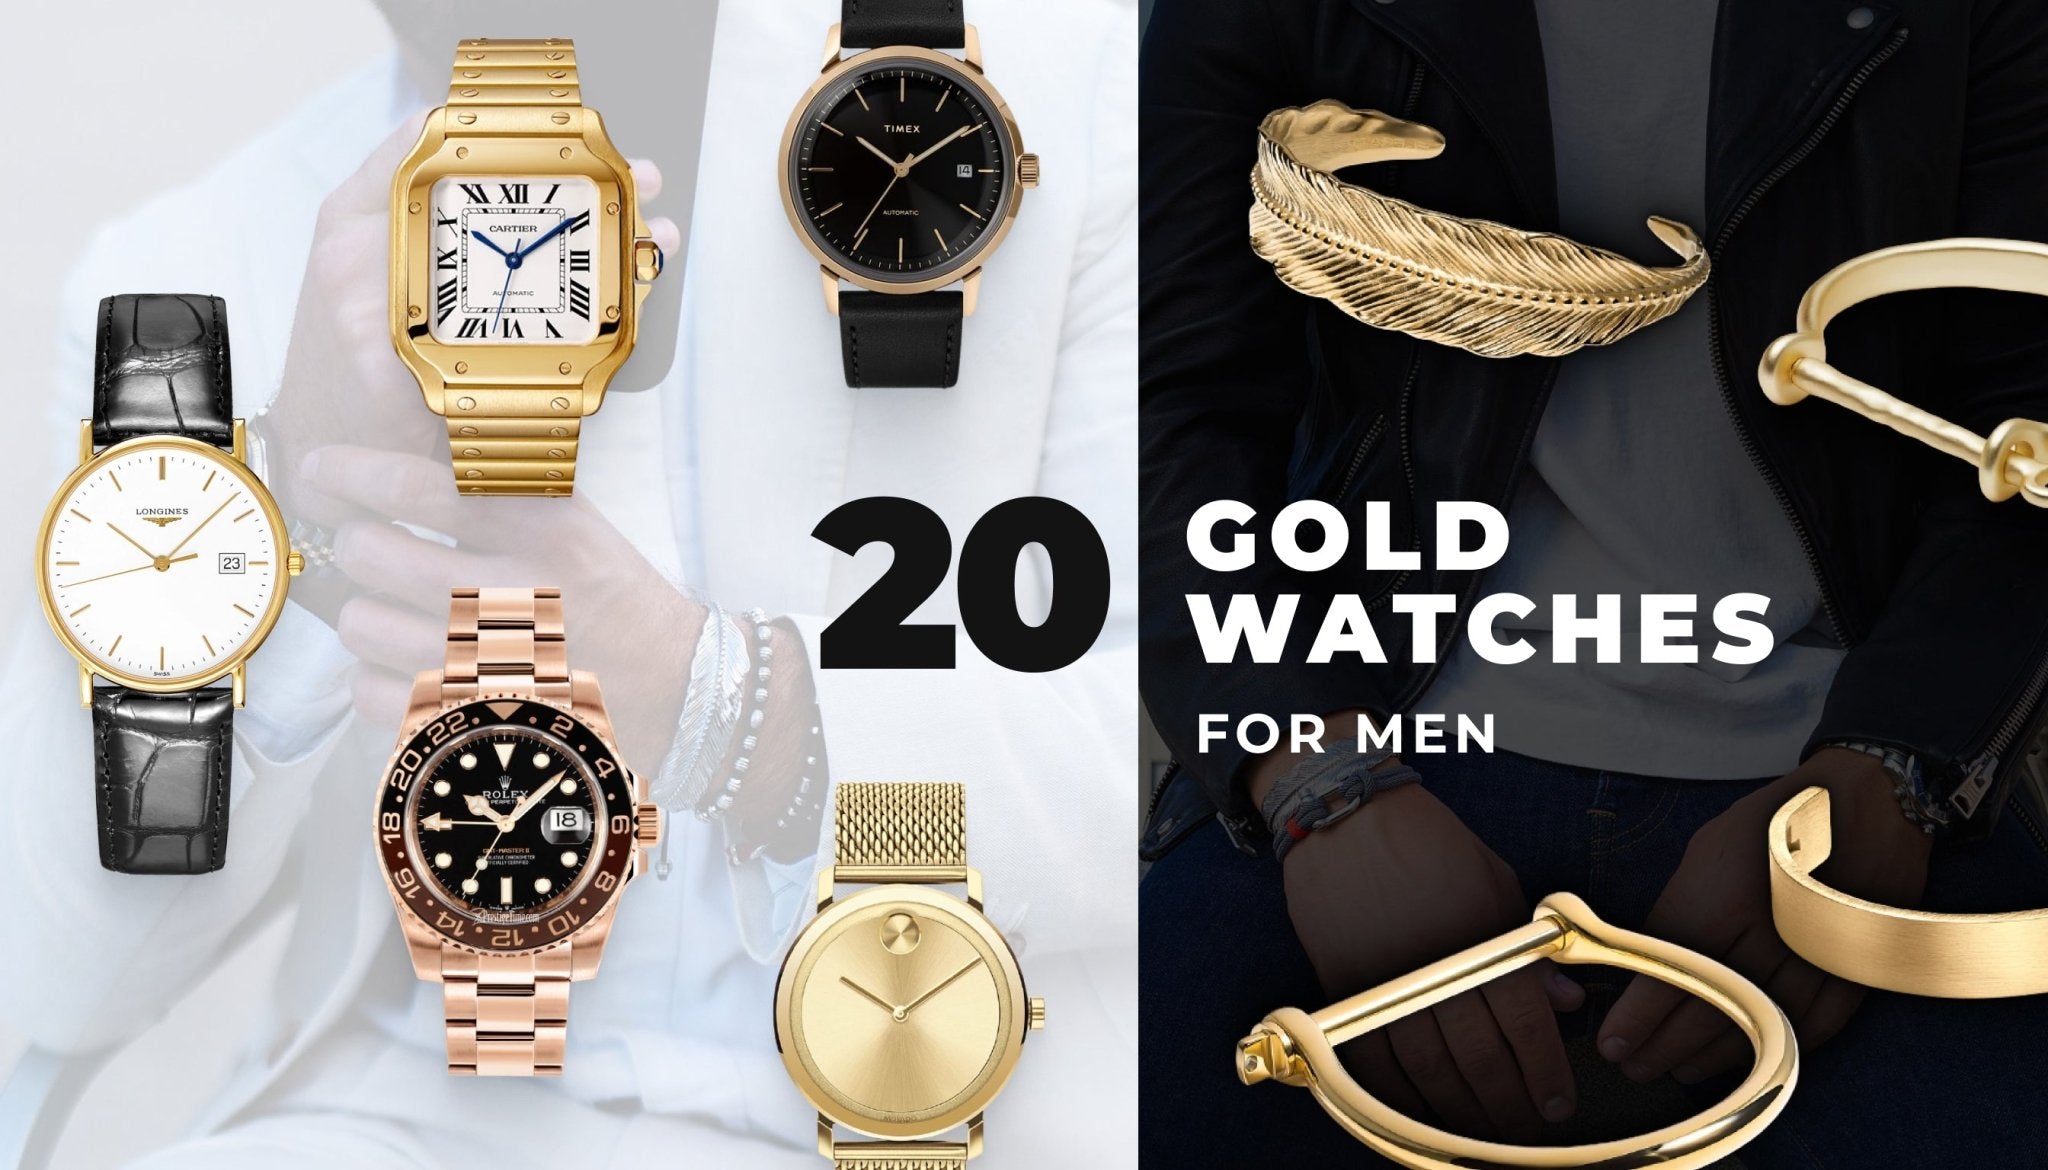 20 Gold Watches for Men - Elegatto